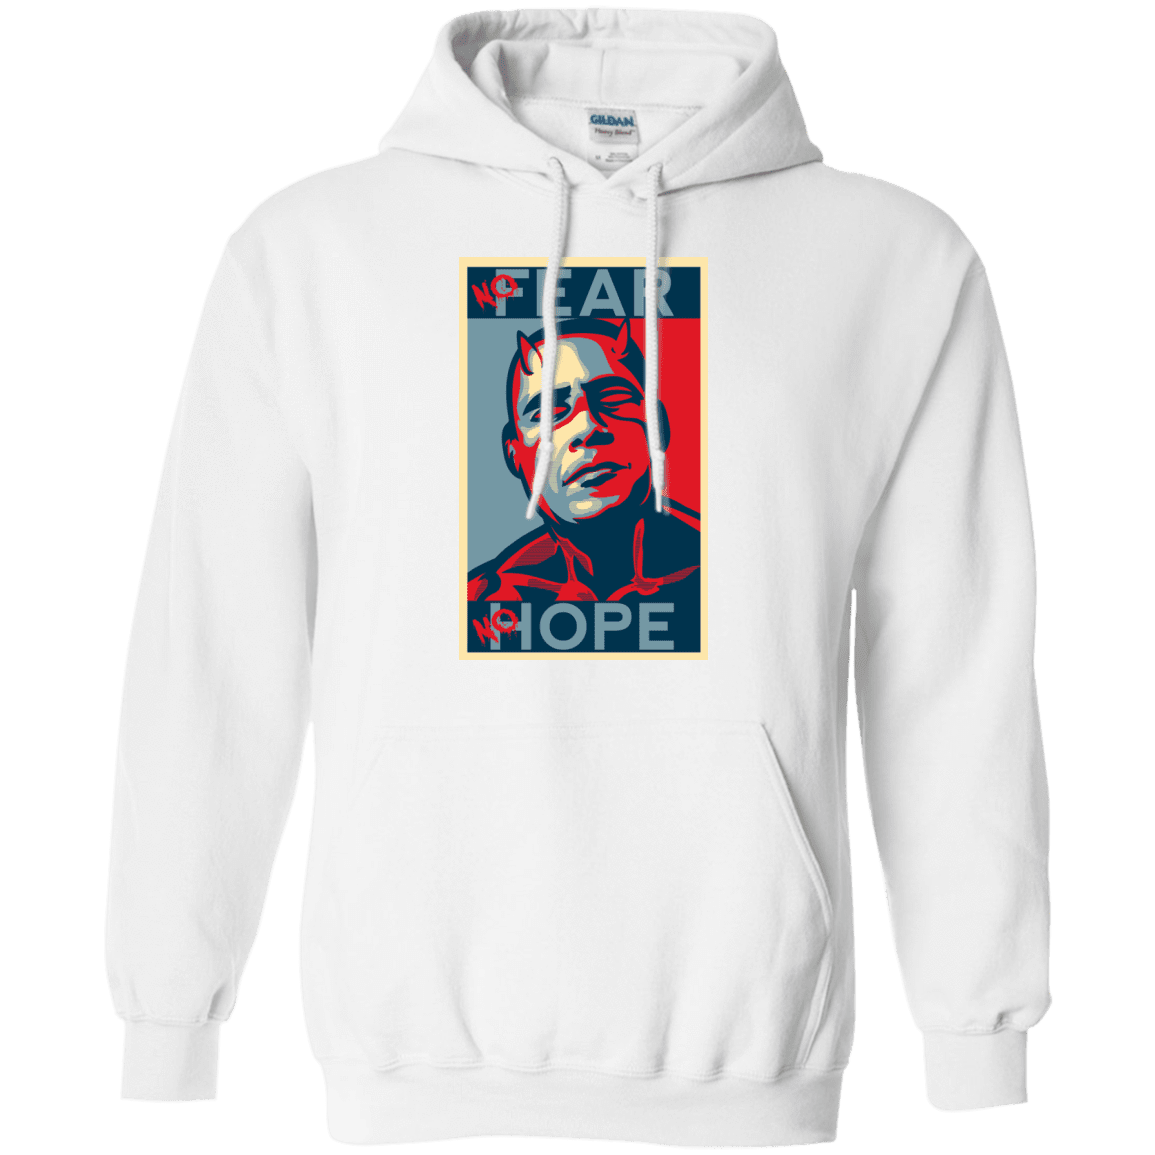 Sweatshirts White / Small A man with no fear Pullover Hoodie